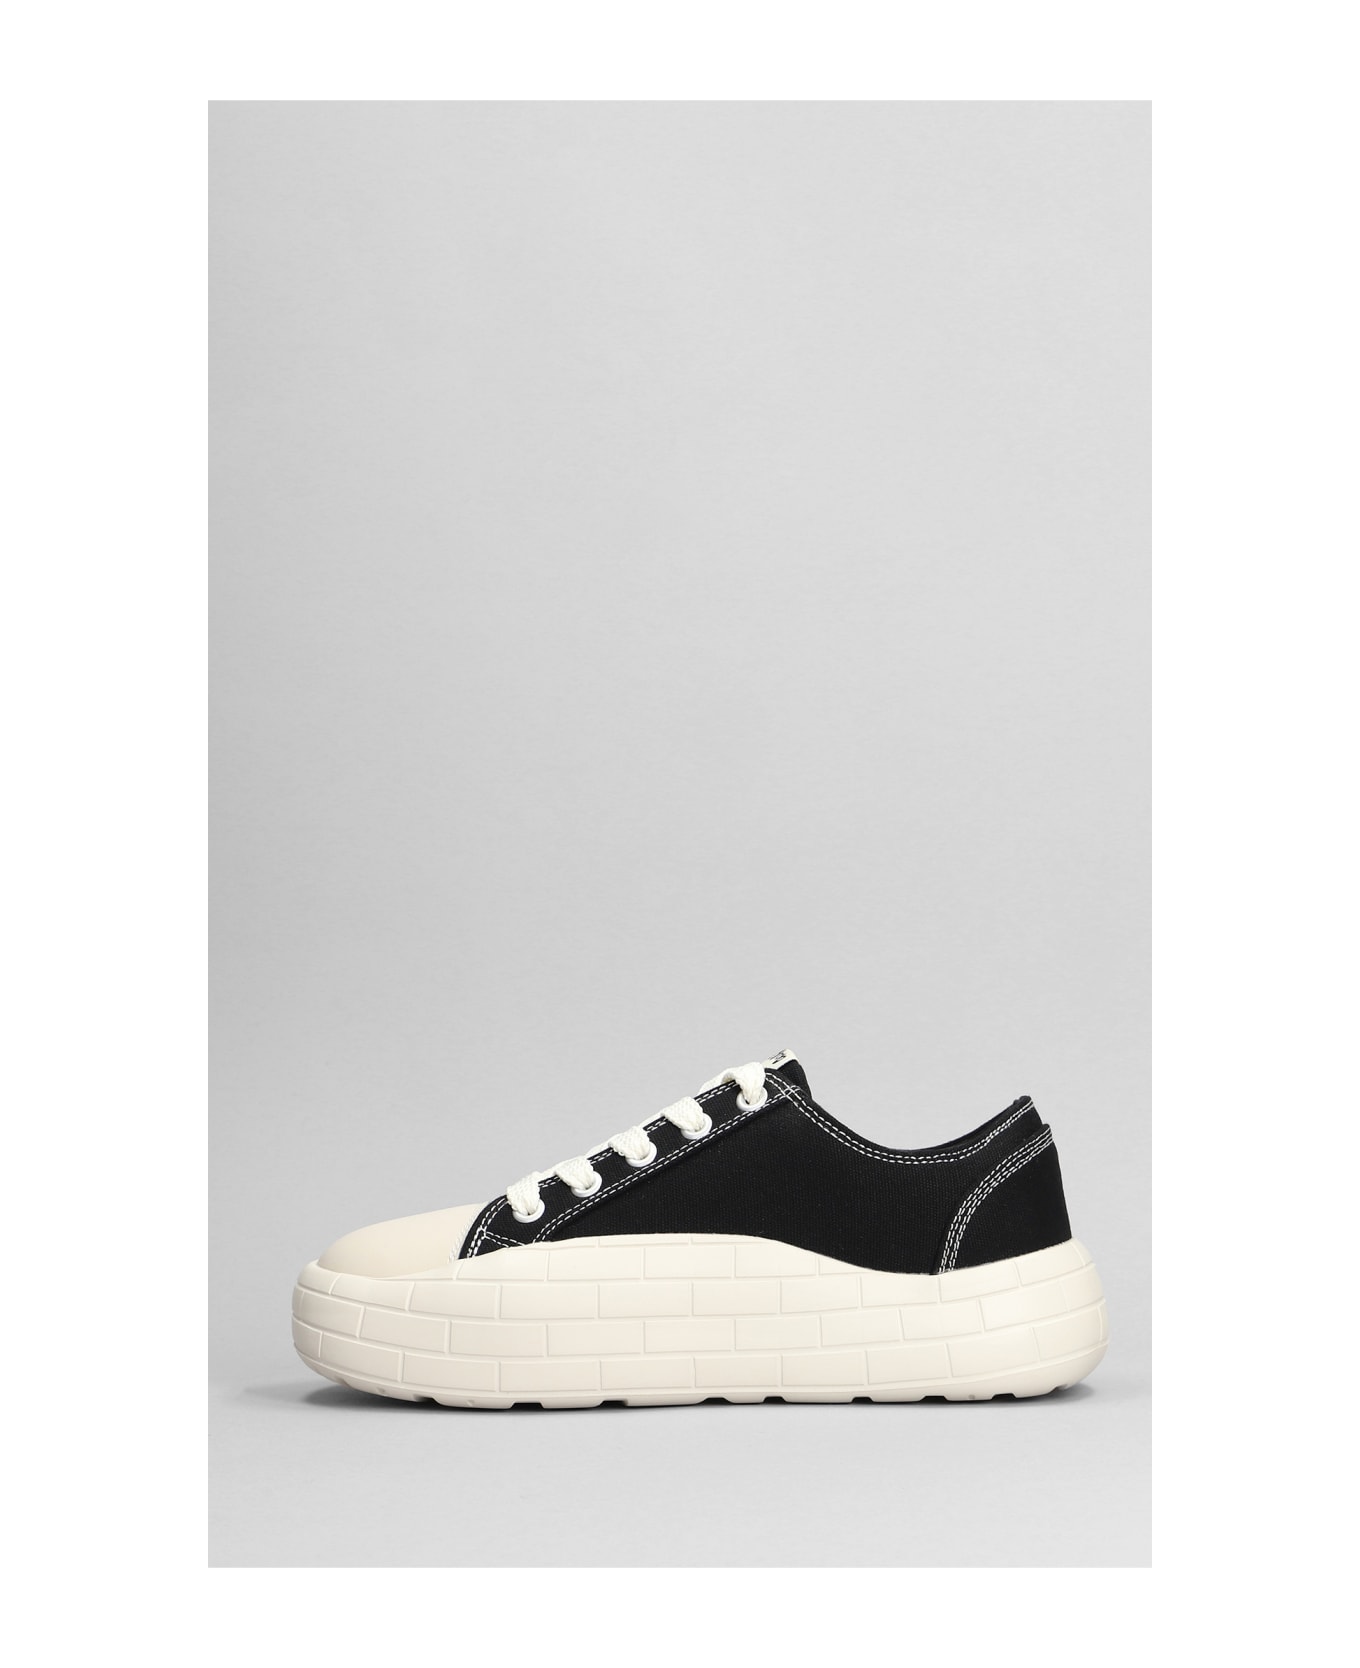 Acupuncture Nyu Vulc G2 Sneakers In Black Canvas - black